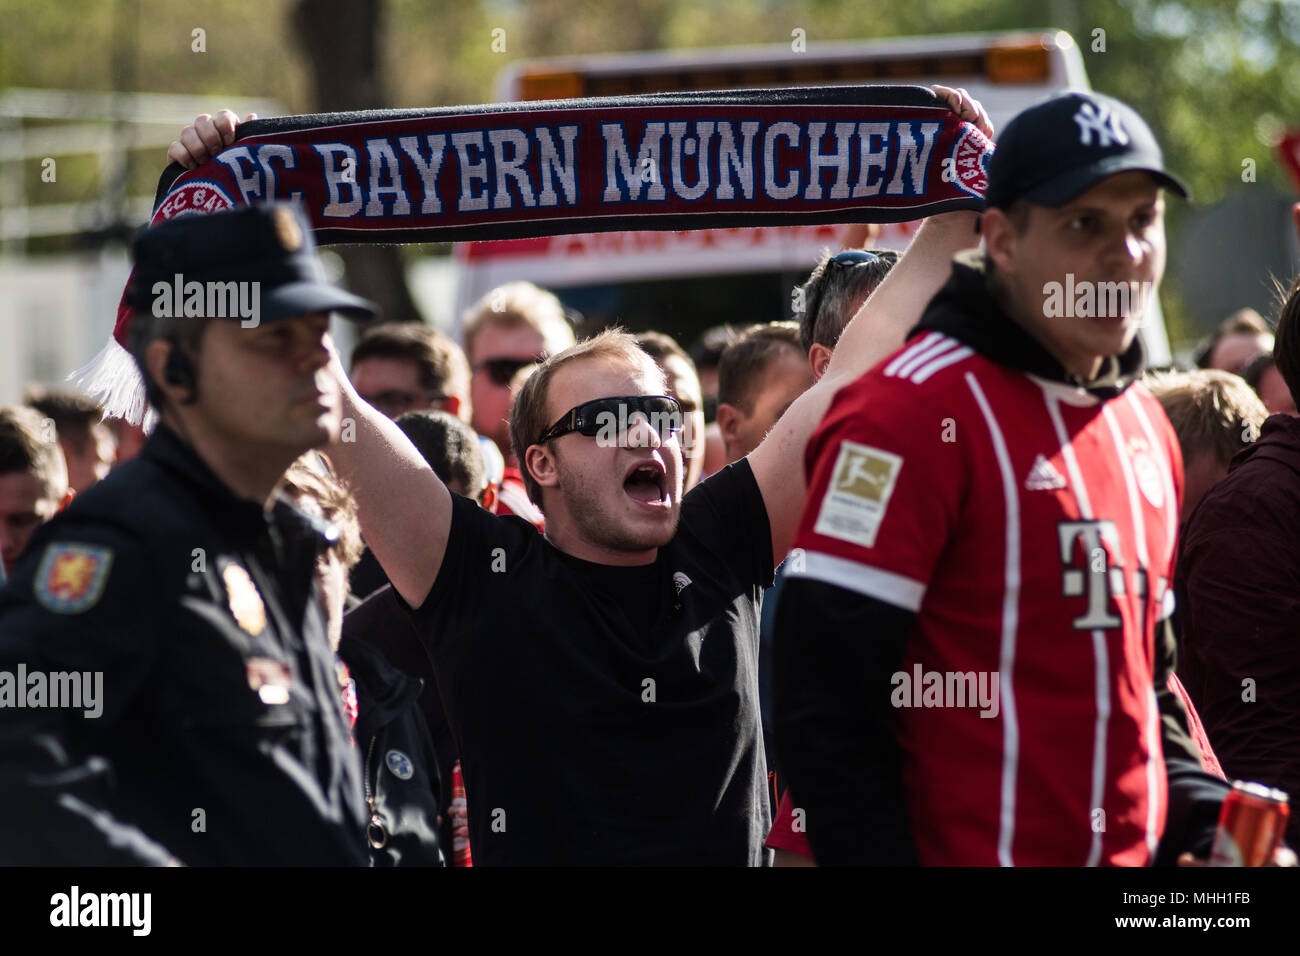 Madrid, Spain. 1st May, 2018. Bayern Munich fans in Santiago Bernabeu Stadium escorted by police ahead of Champions League match against Real Madrid, in Madrid, Spain. Credit: Marcos del Mazo/Alamy Live News Stock Photo